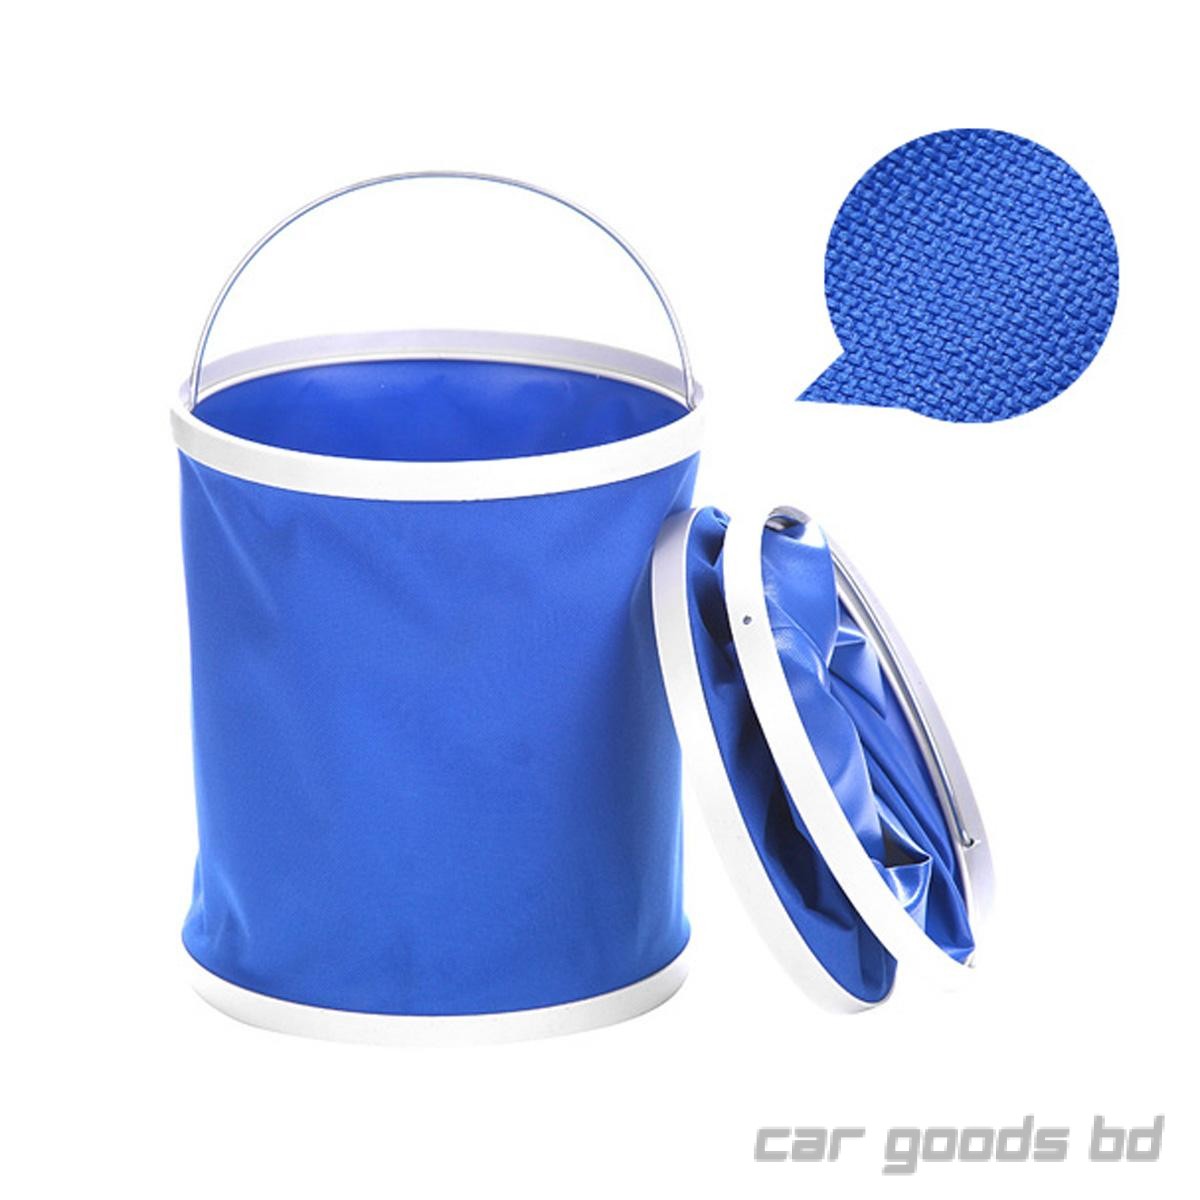 Joom online store offers high-quality products at low prices. 11 Liter Bucket Folding Telescopic Canvas Bucket Large Oxford Cloth Car Wash Outdoor Fishing Bucket